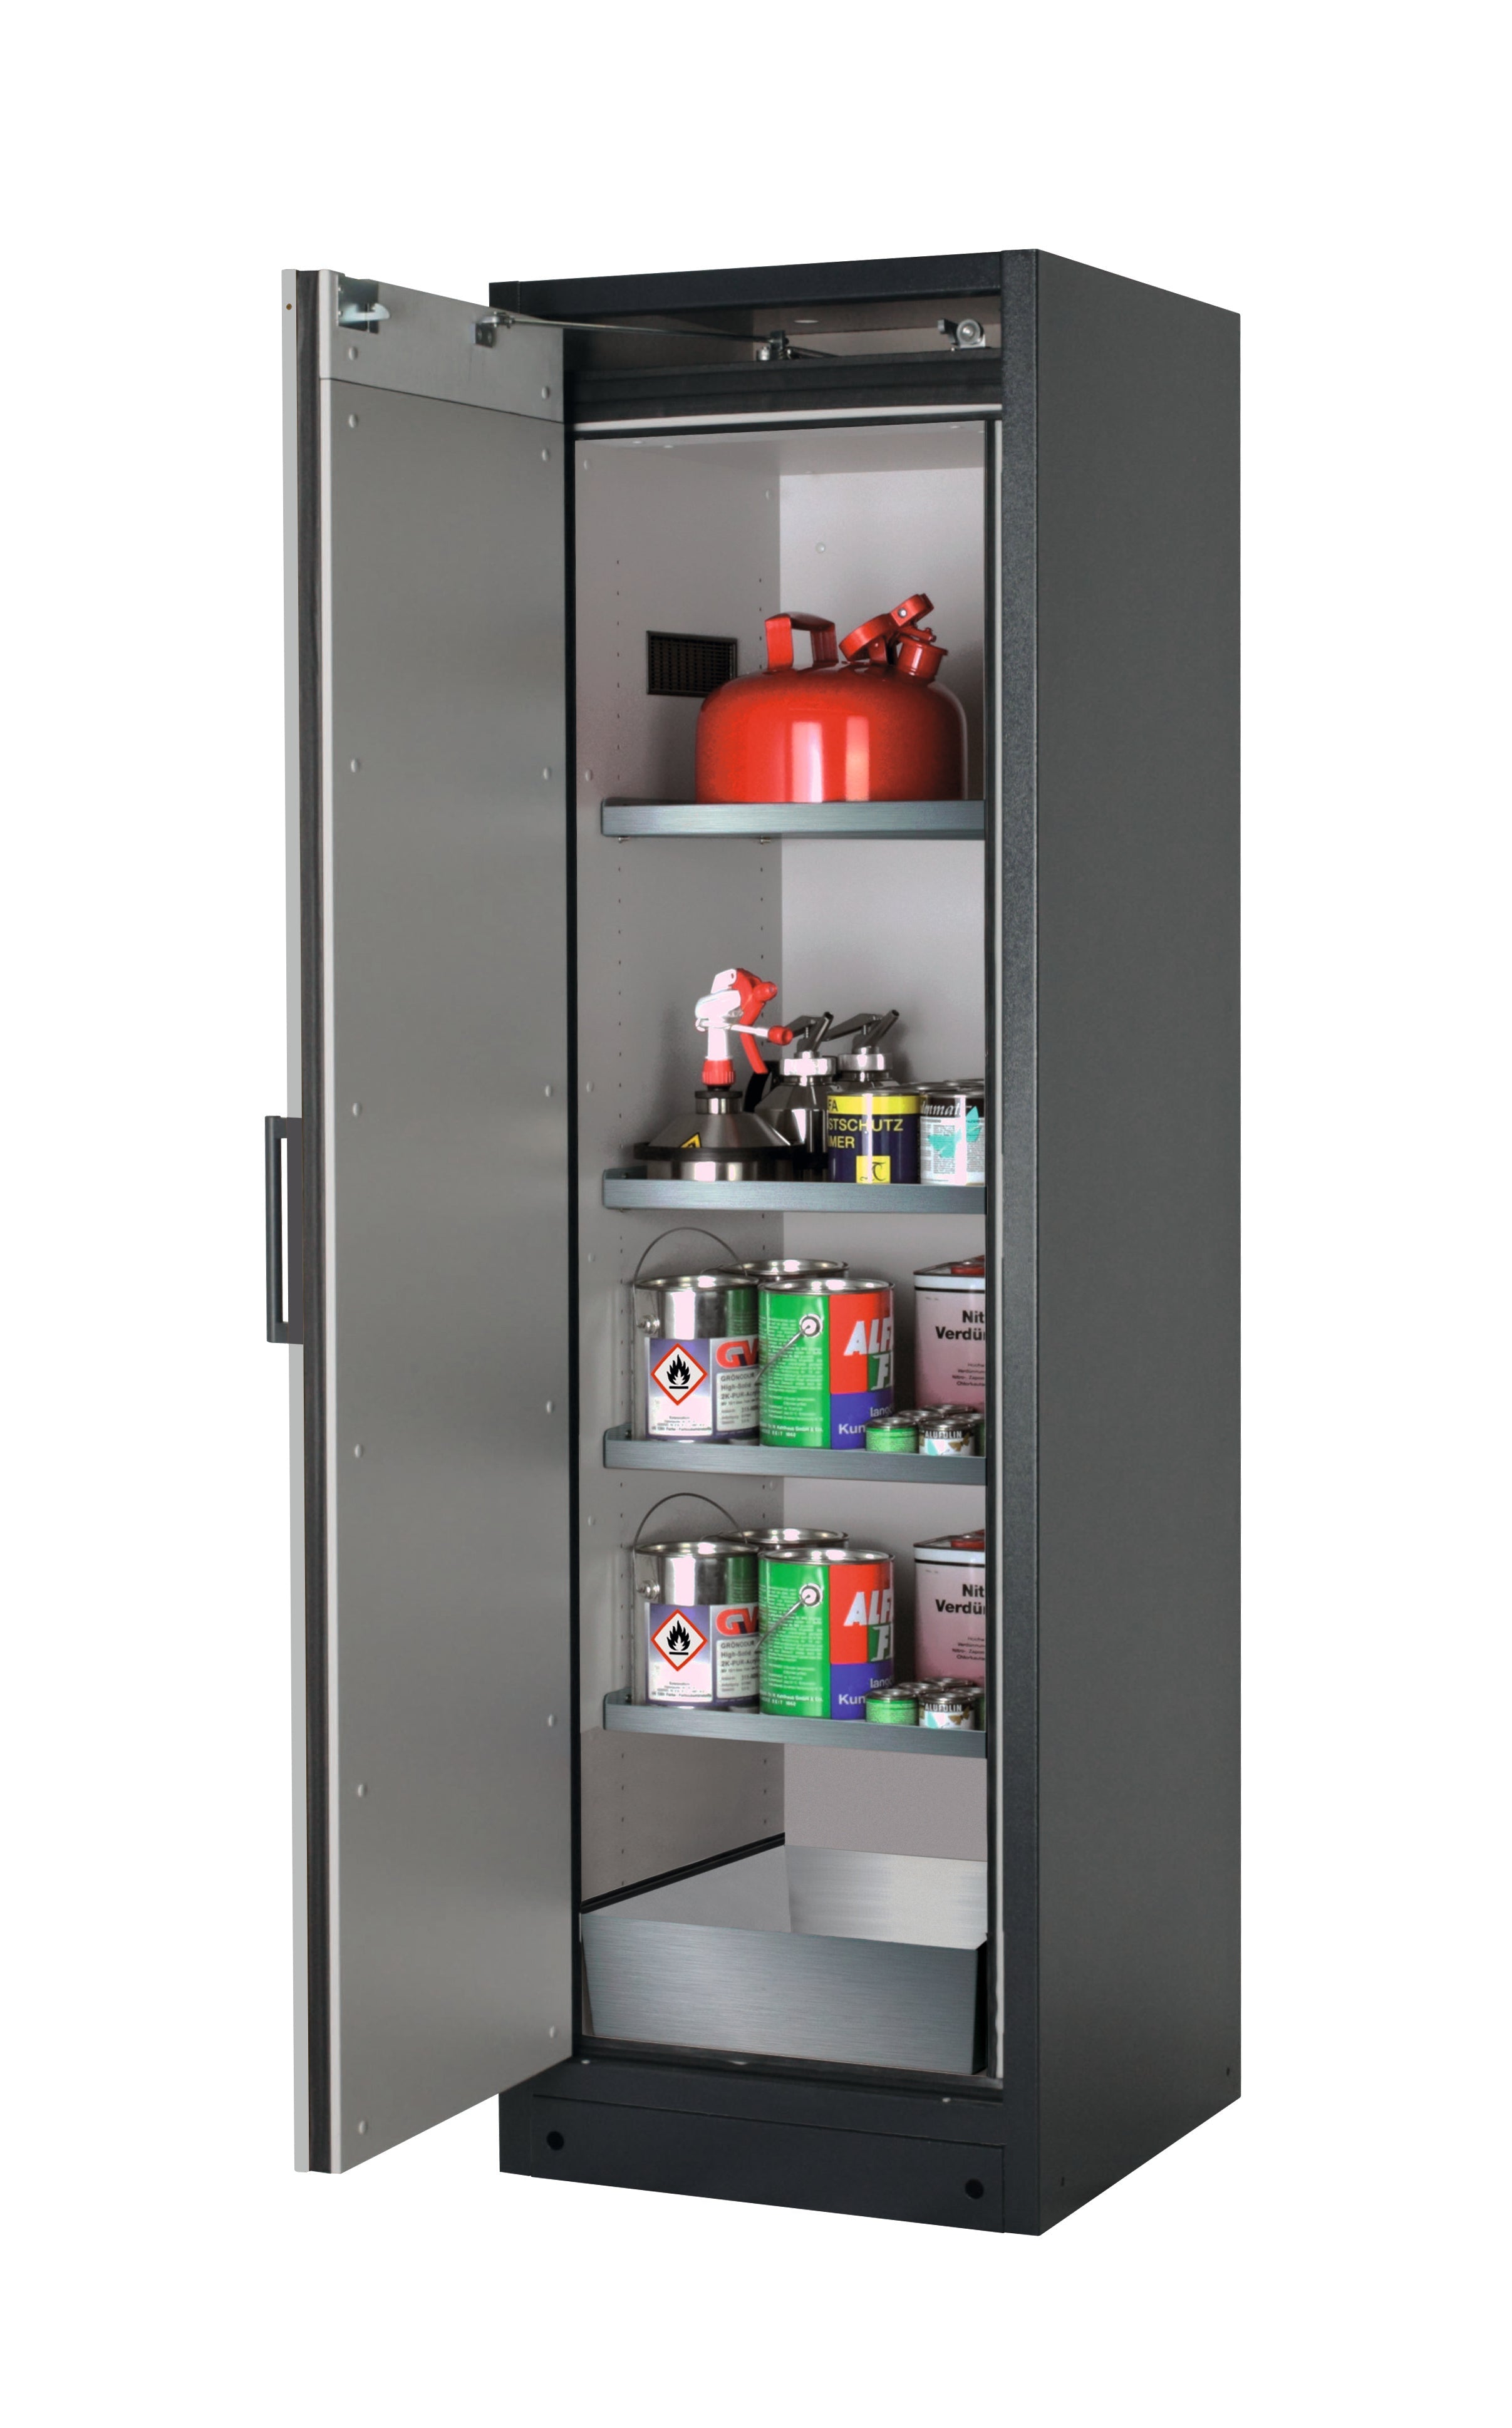 Type 90 safety storage cabinet Q-CLASSIC-90 model Q90.195.060 in pure white RAL 9010 with 4x shelf standard (stainless steel 1.4301),